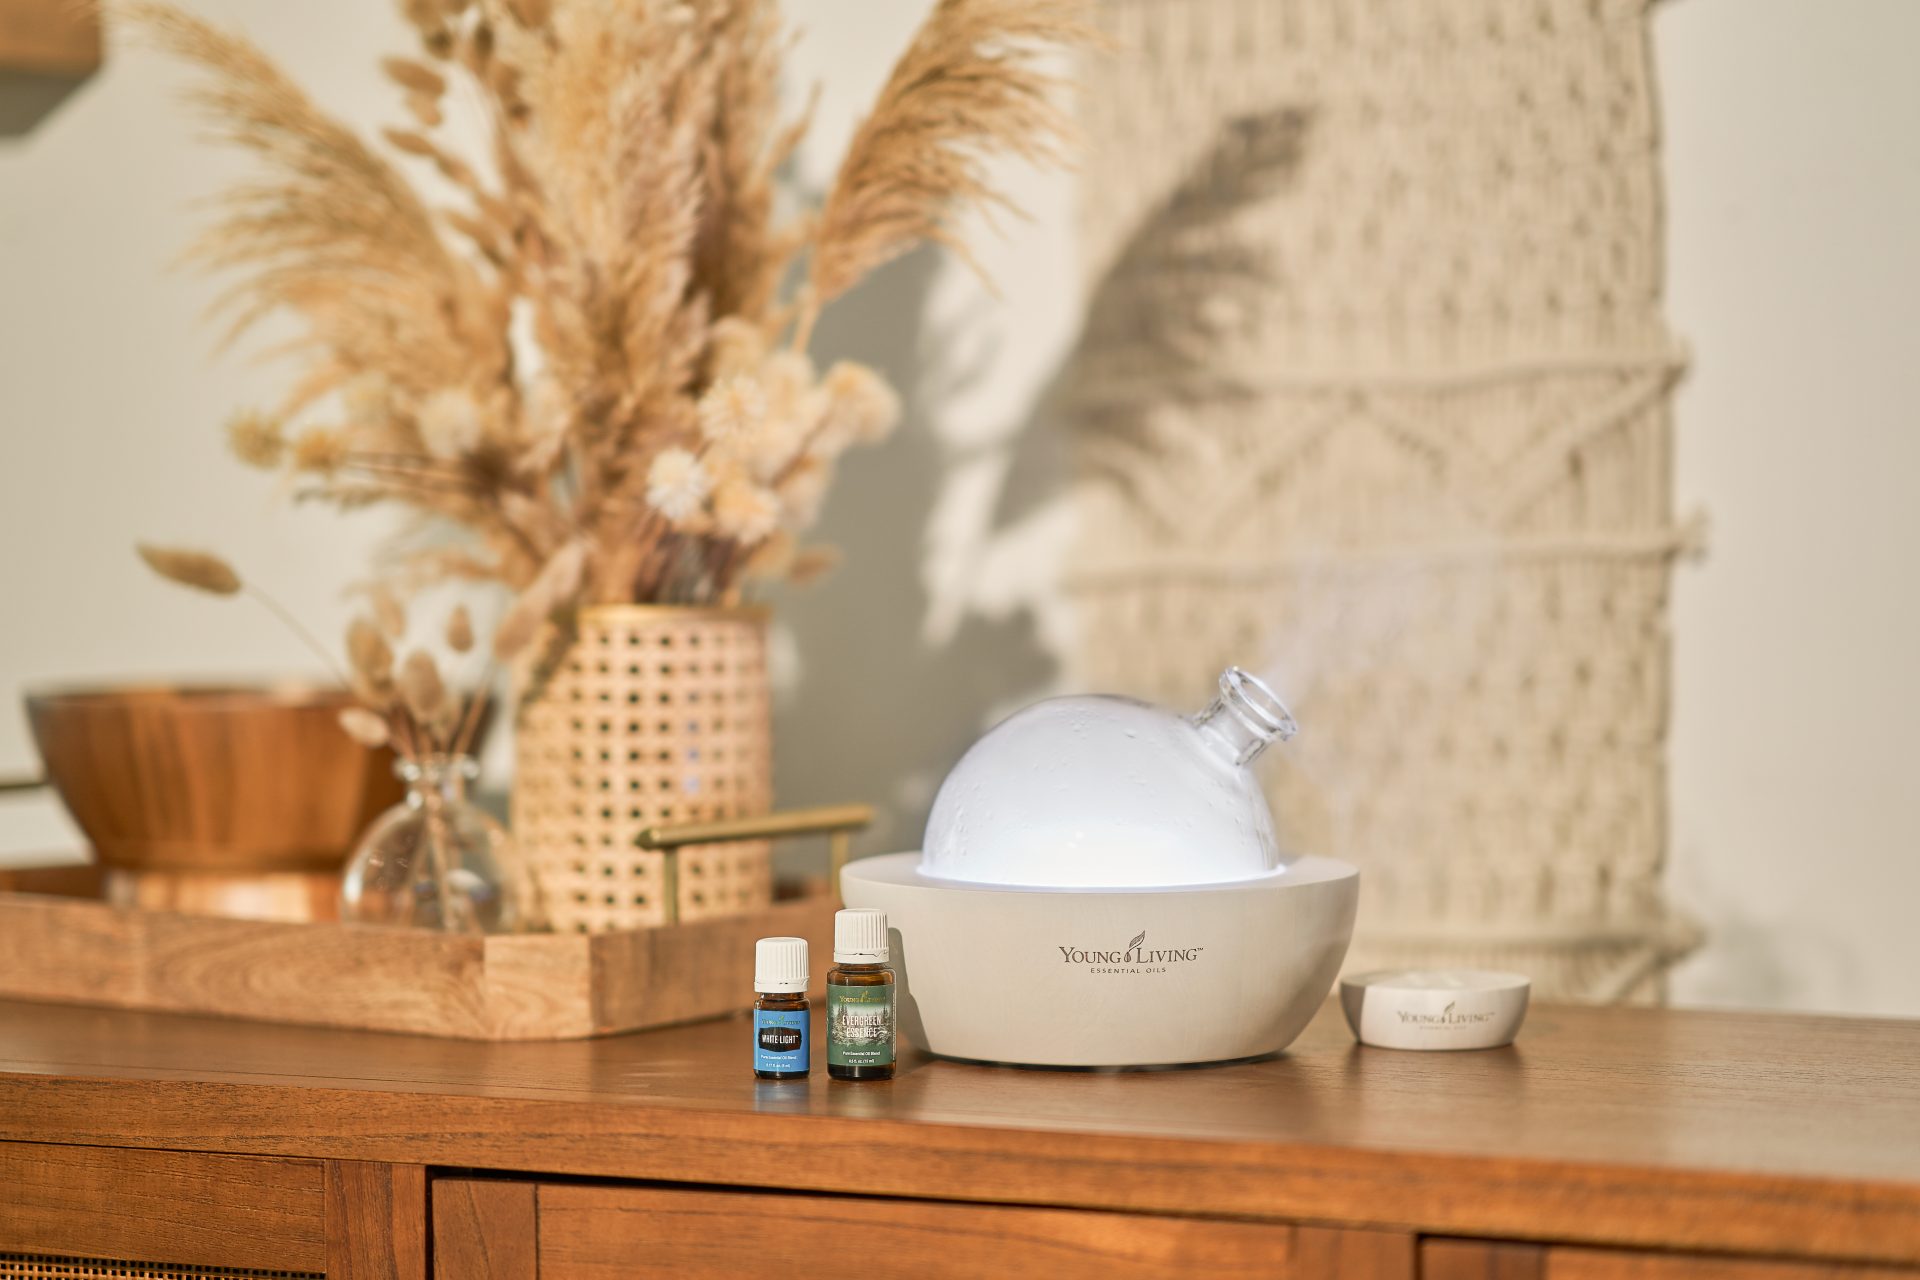 Young Living Essential oils and diffuser